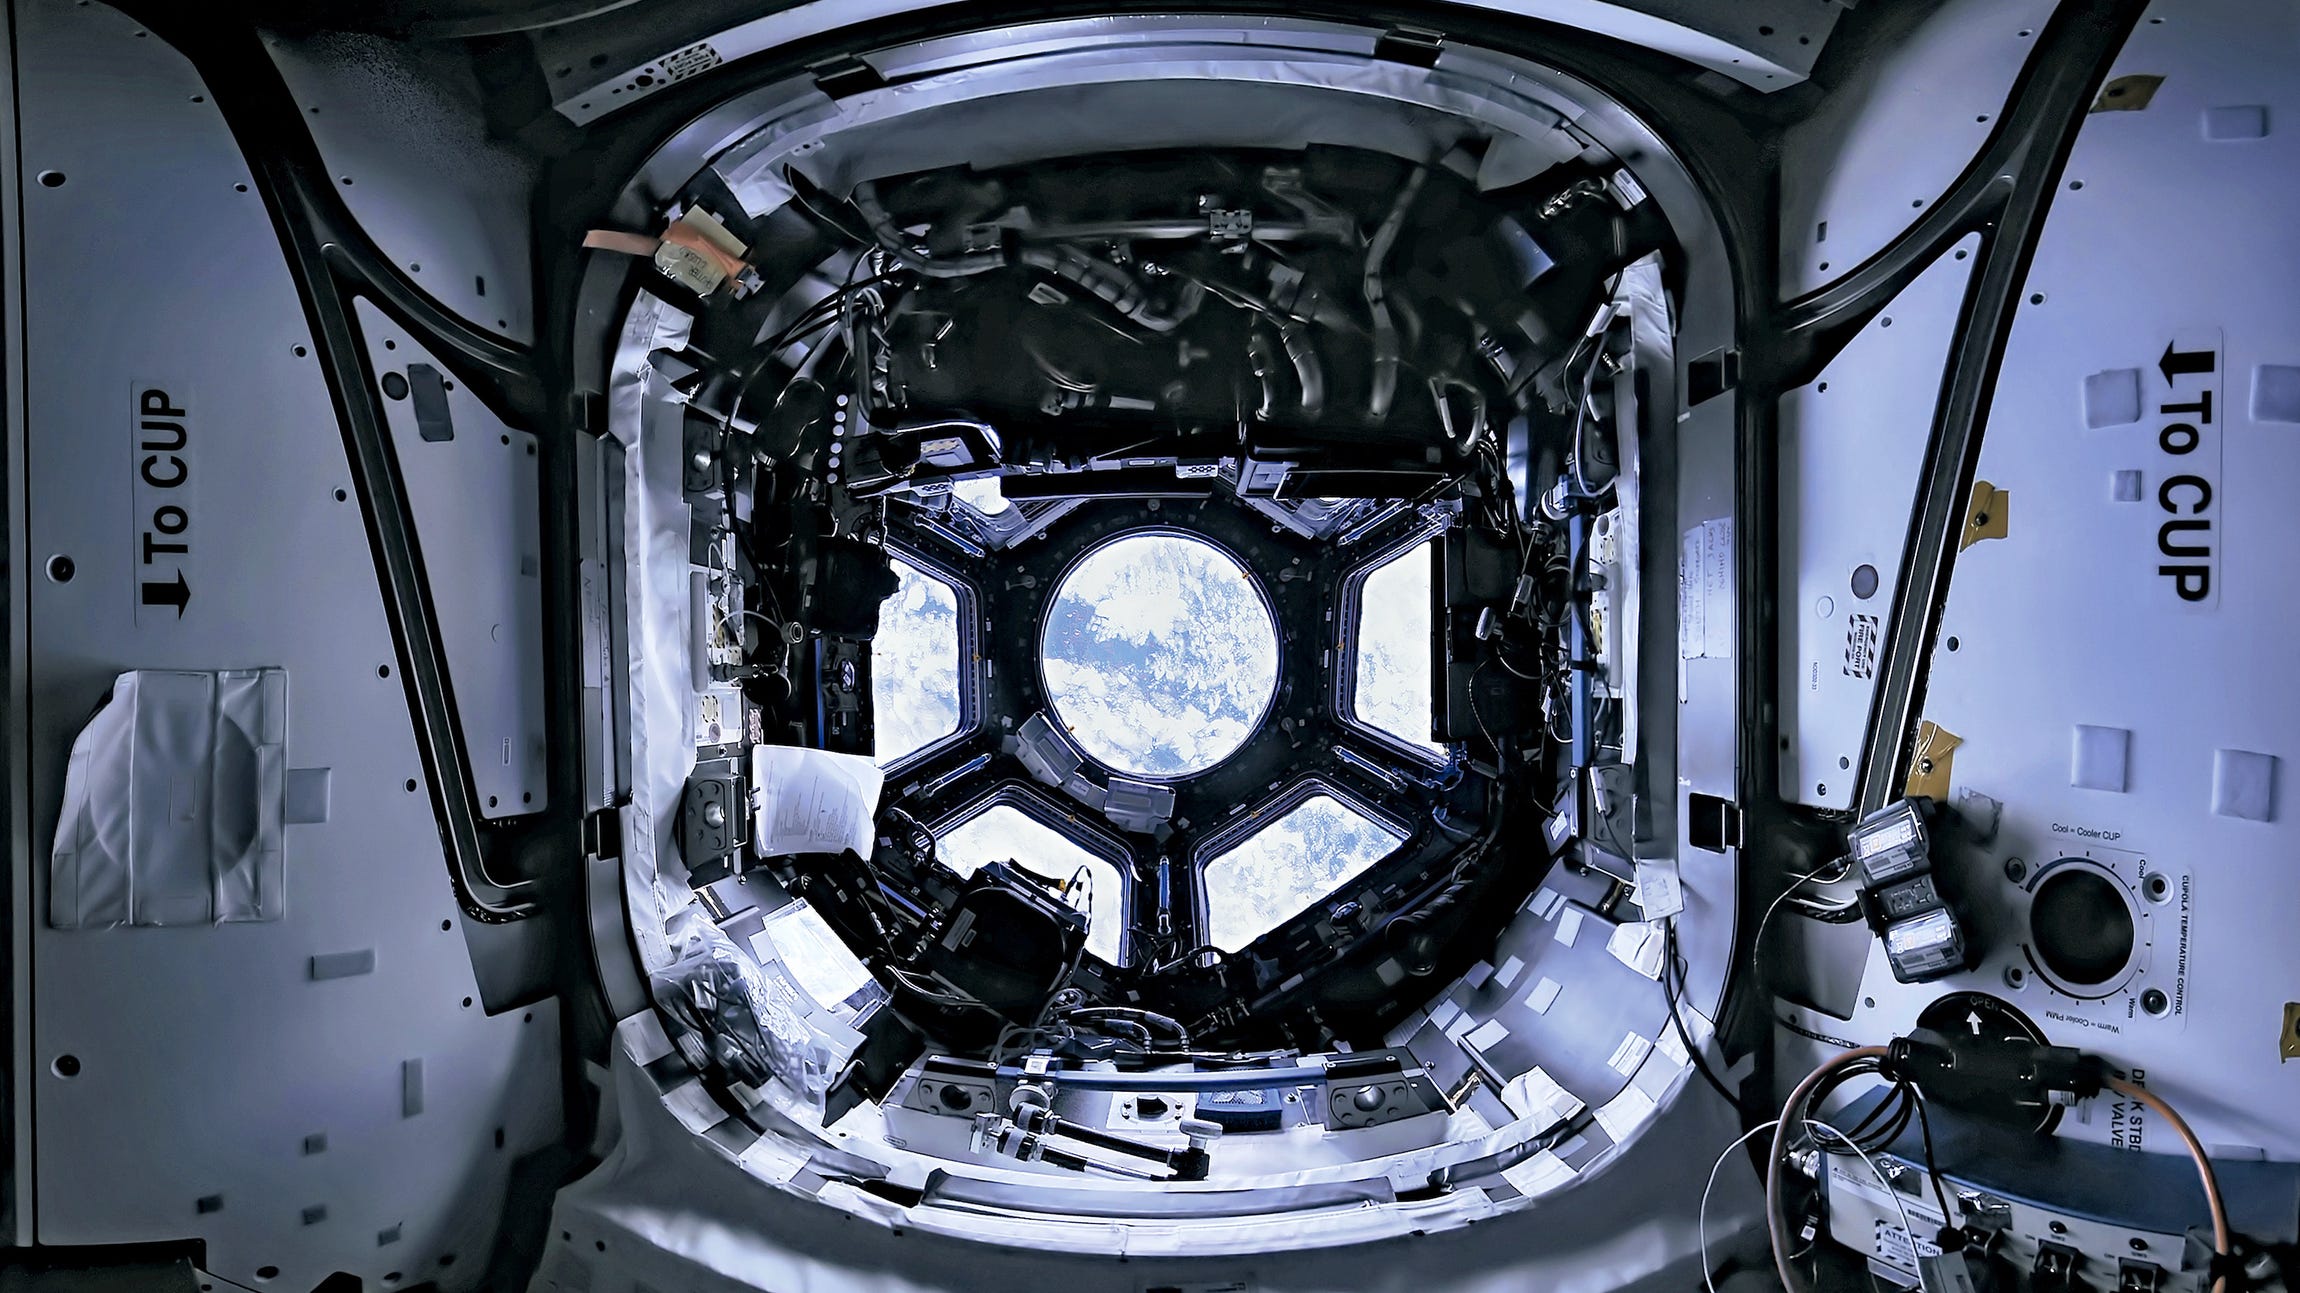 The ISS cupola window offers a glimpse of Earth with swirls of blue and white